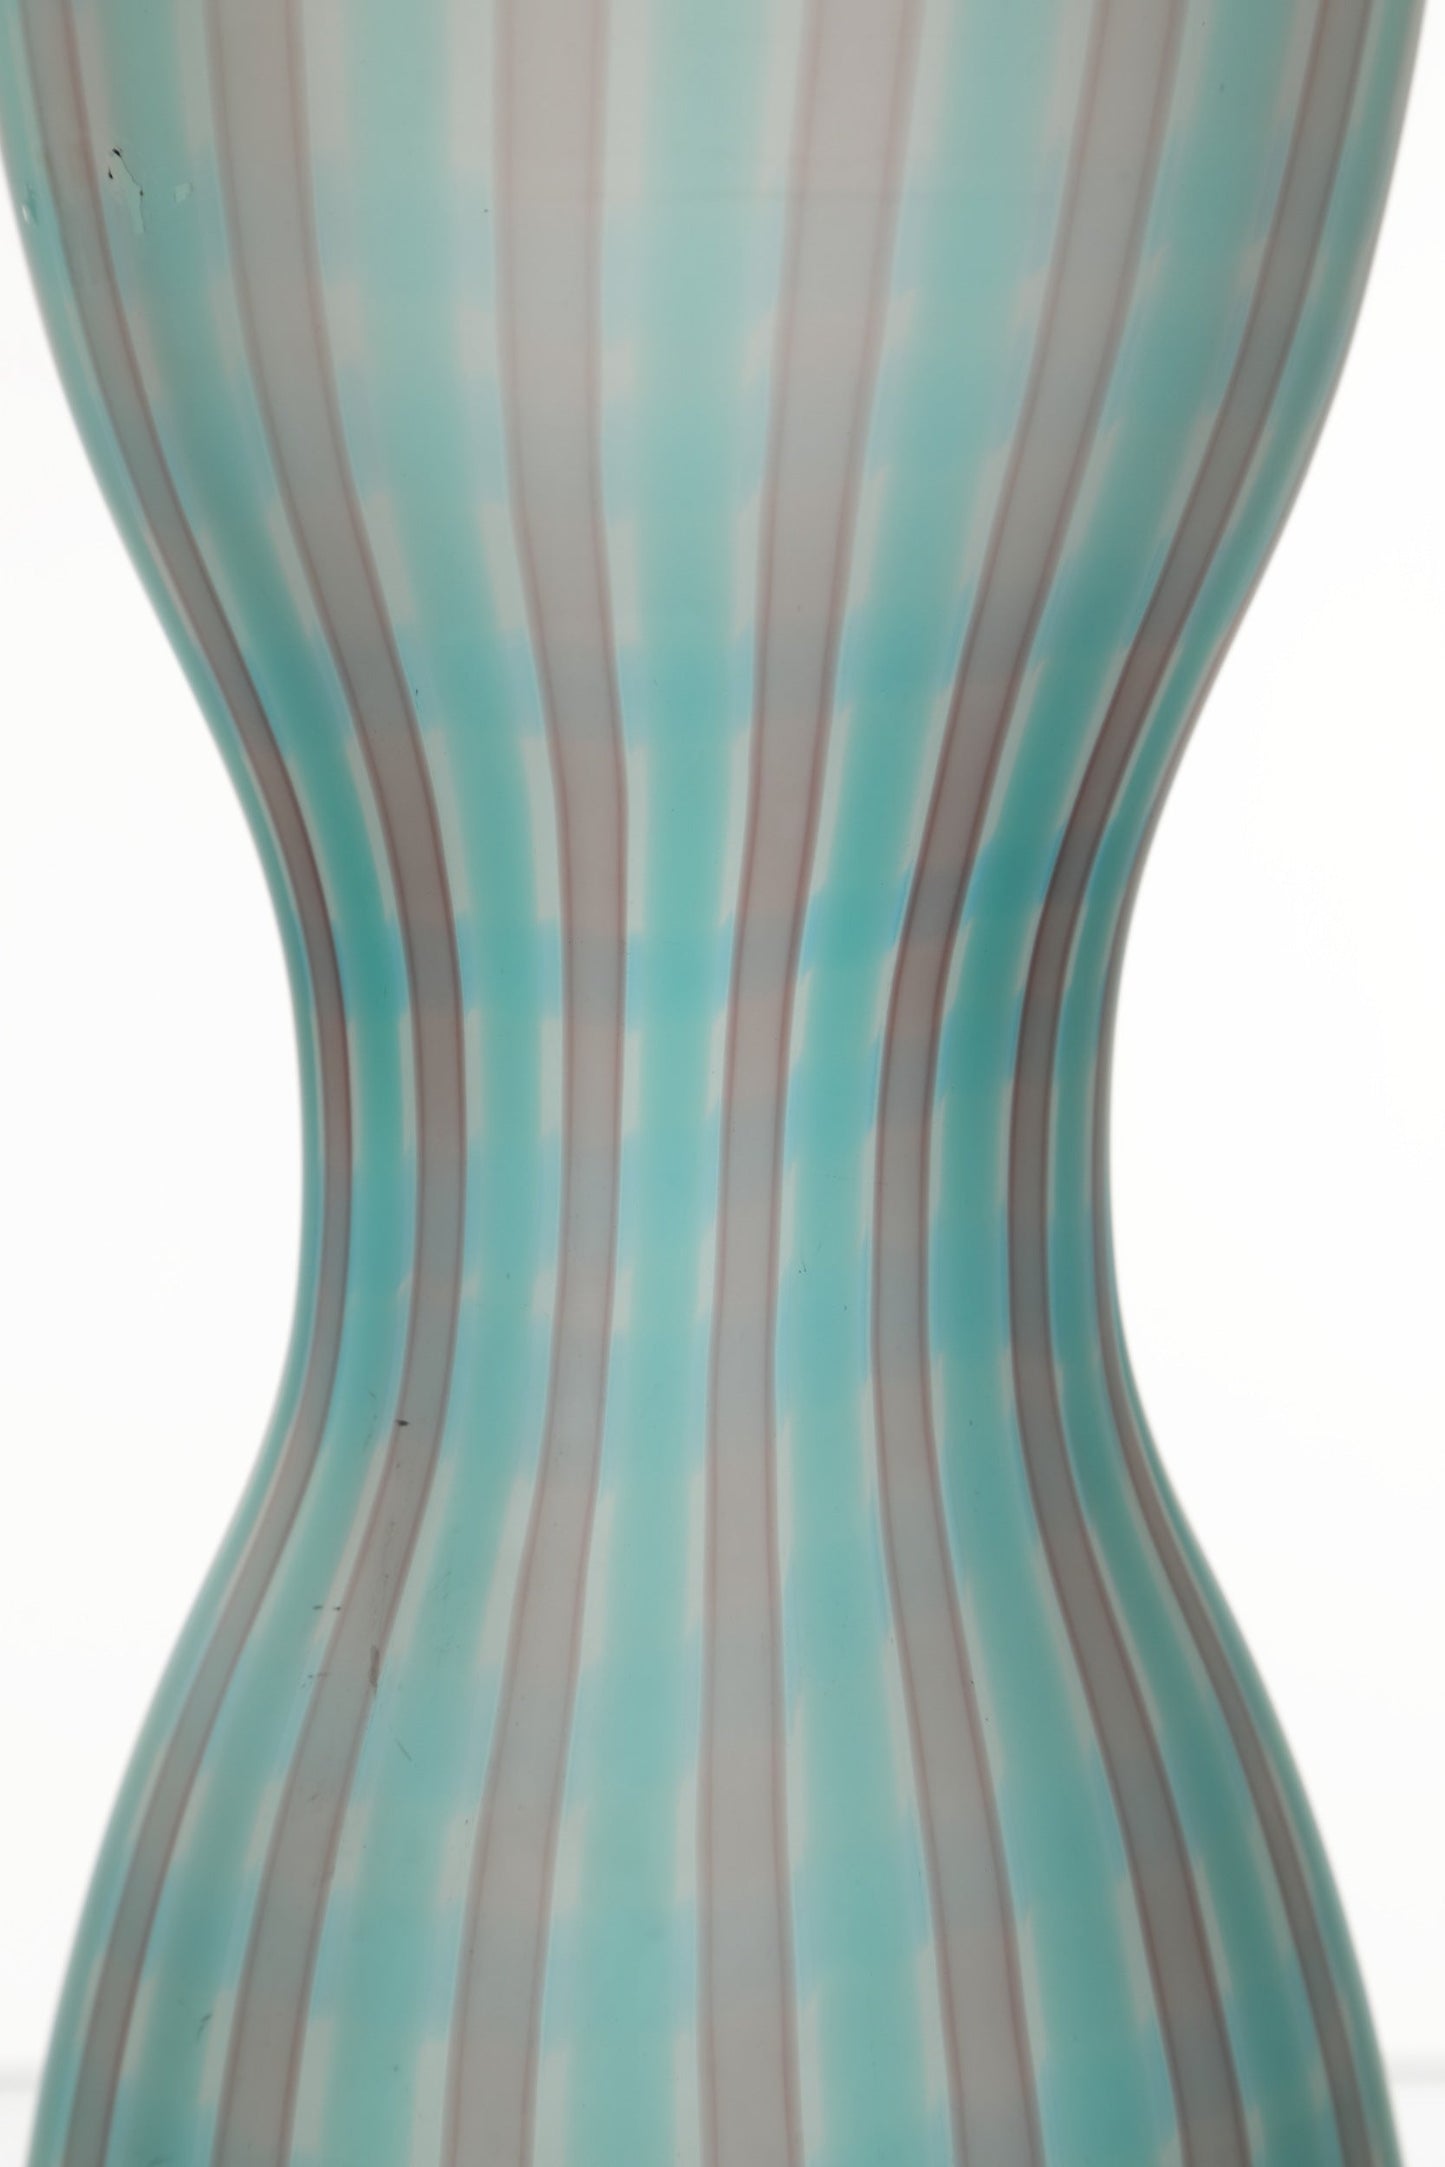 Murano glass vase from the 80s